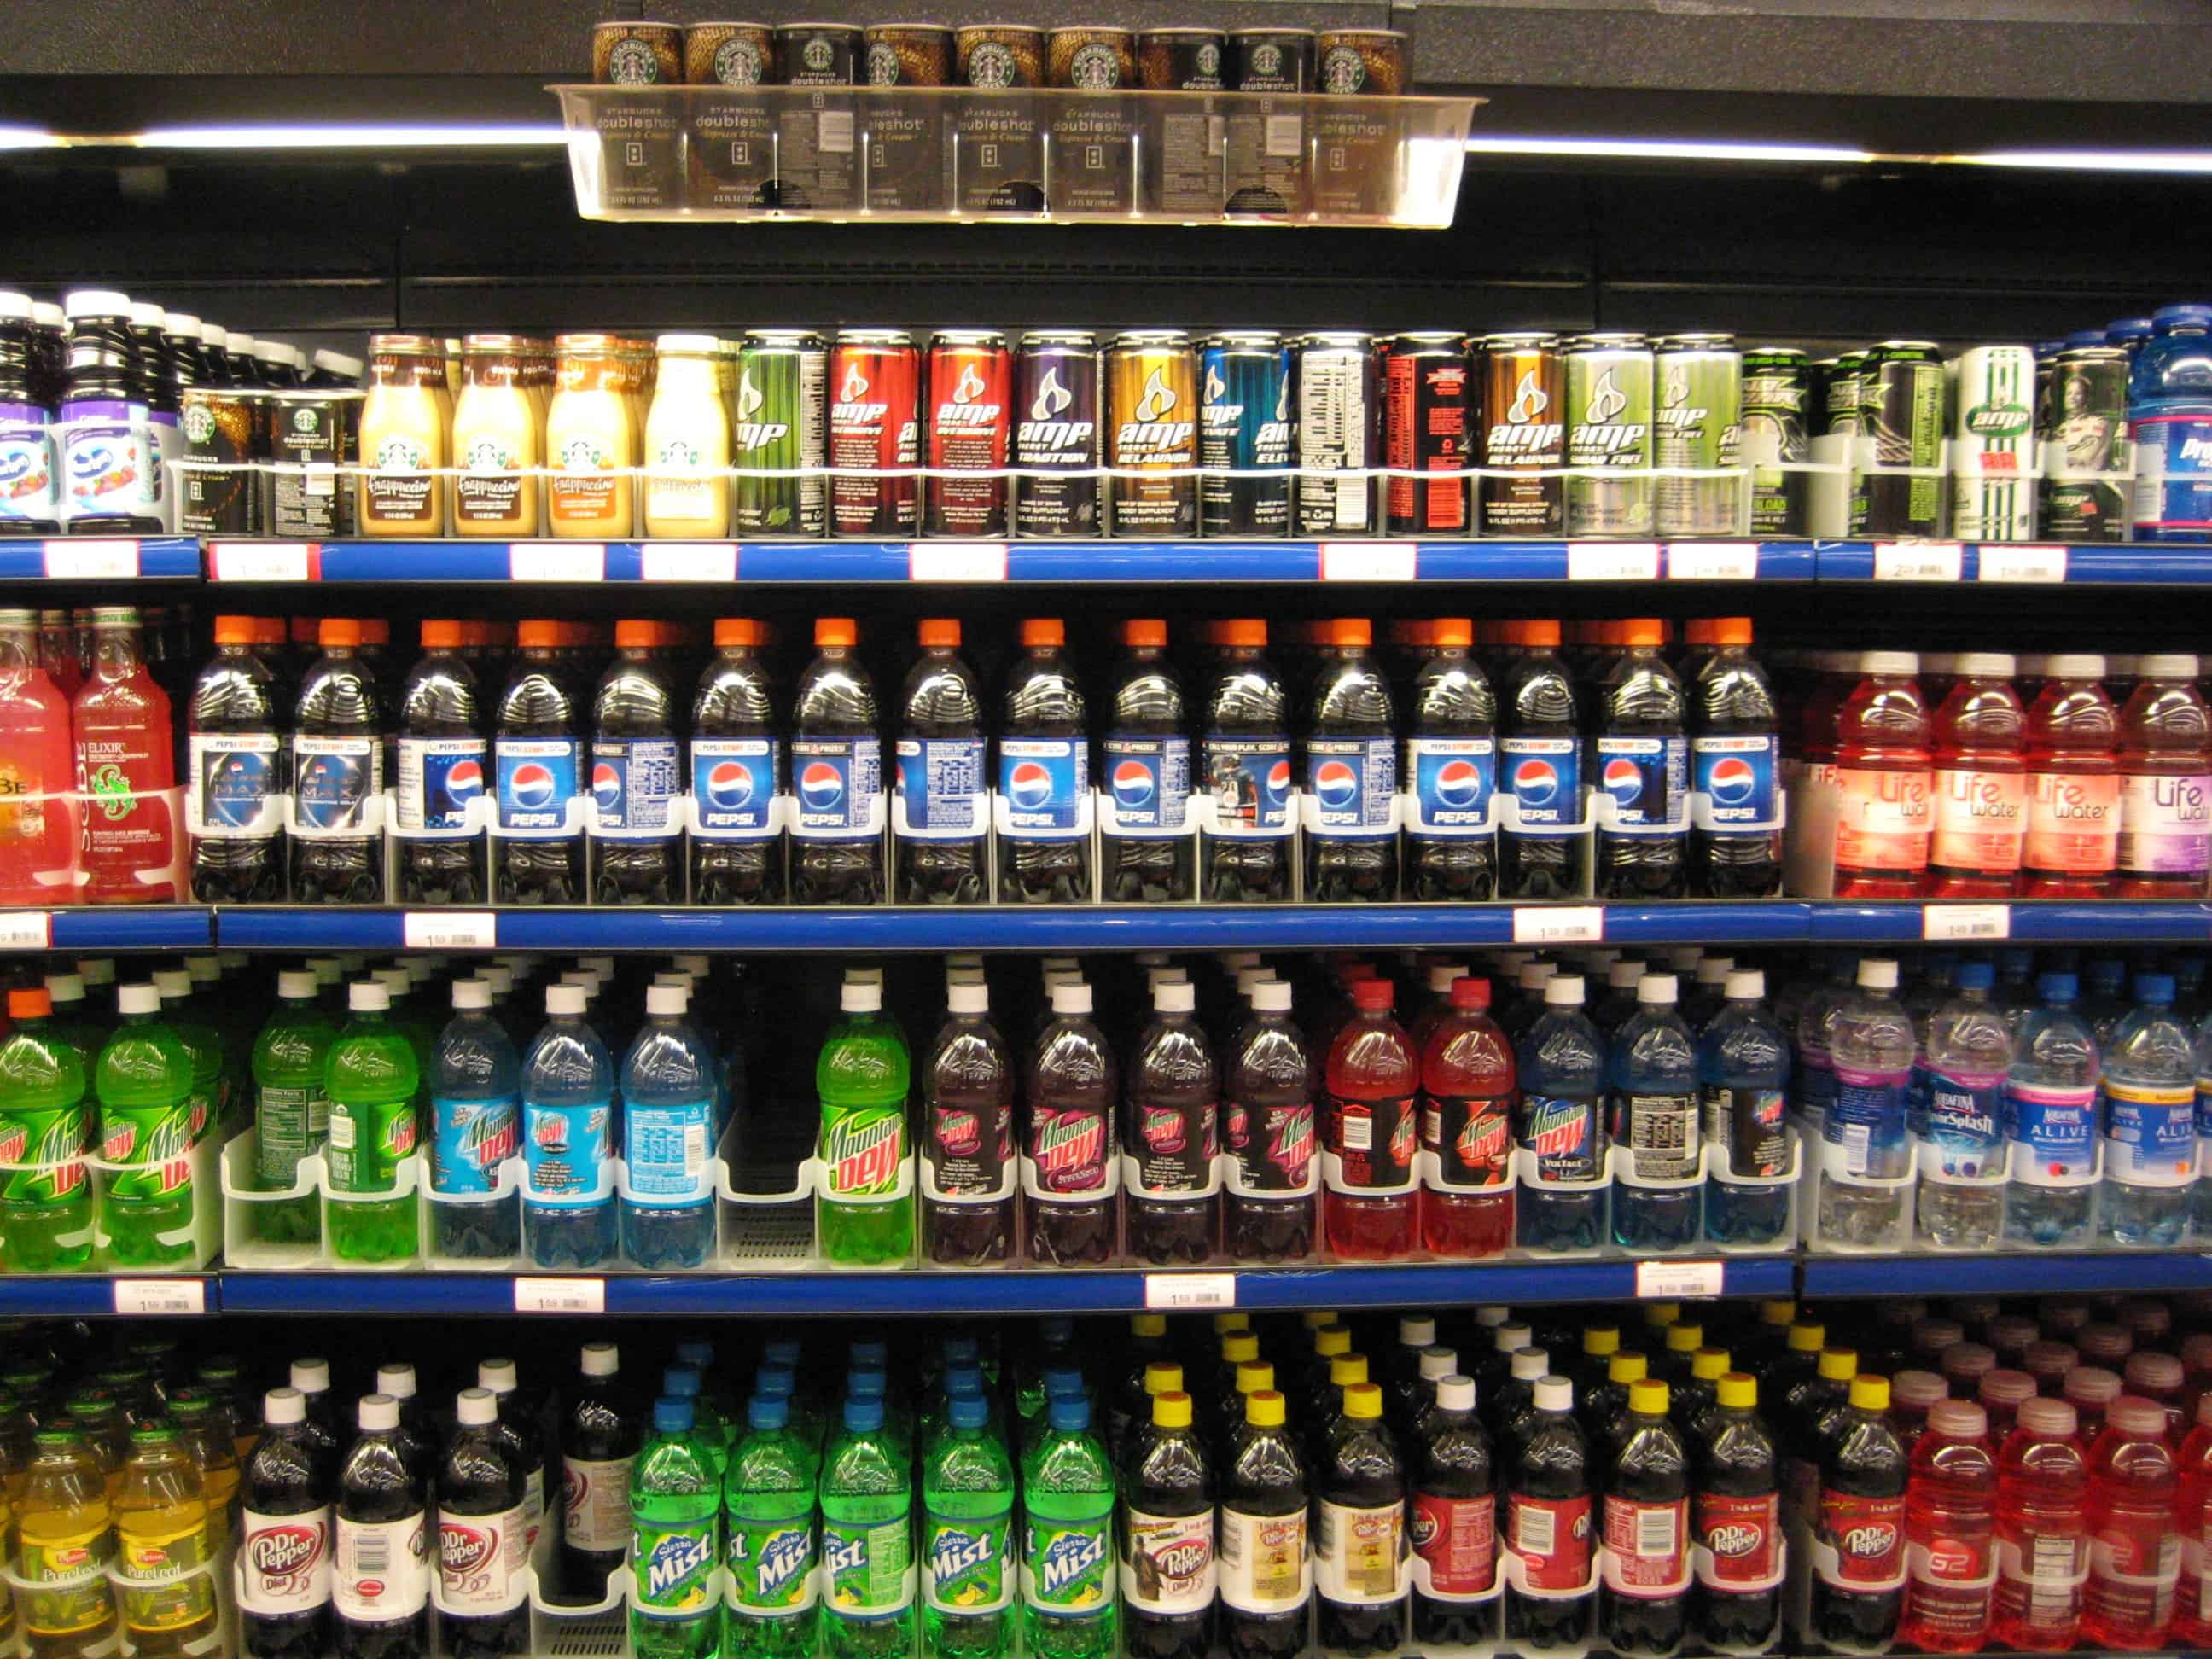 There is a vast array of sugary drinks available. Image credits: Marlith.